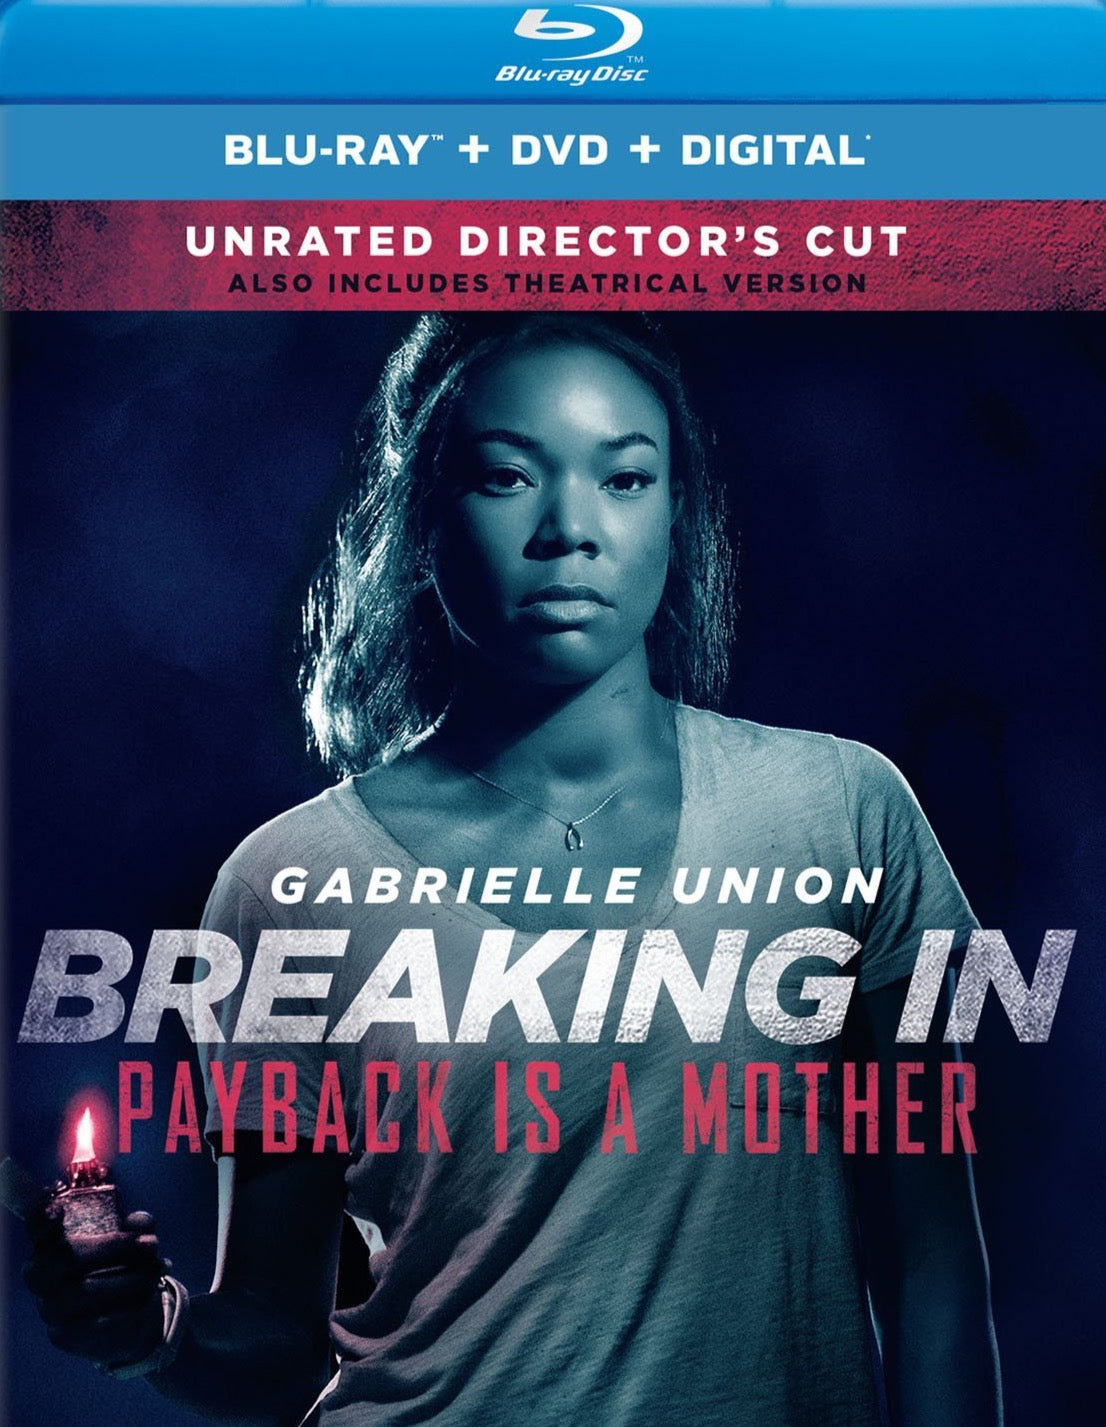 Breaking In [Unrated] (2018) Vudu or Movies Anywhere HD code